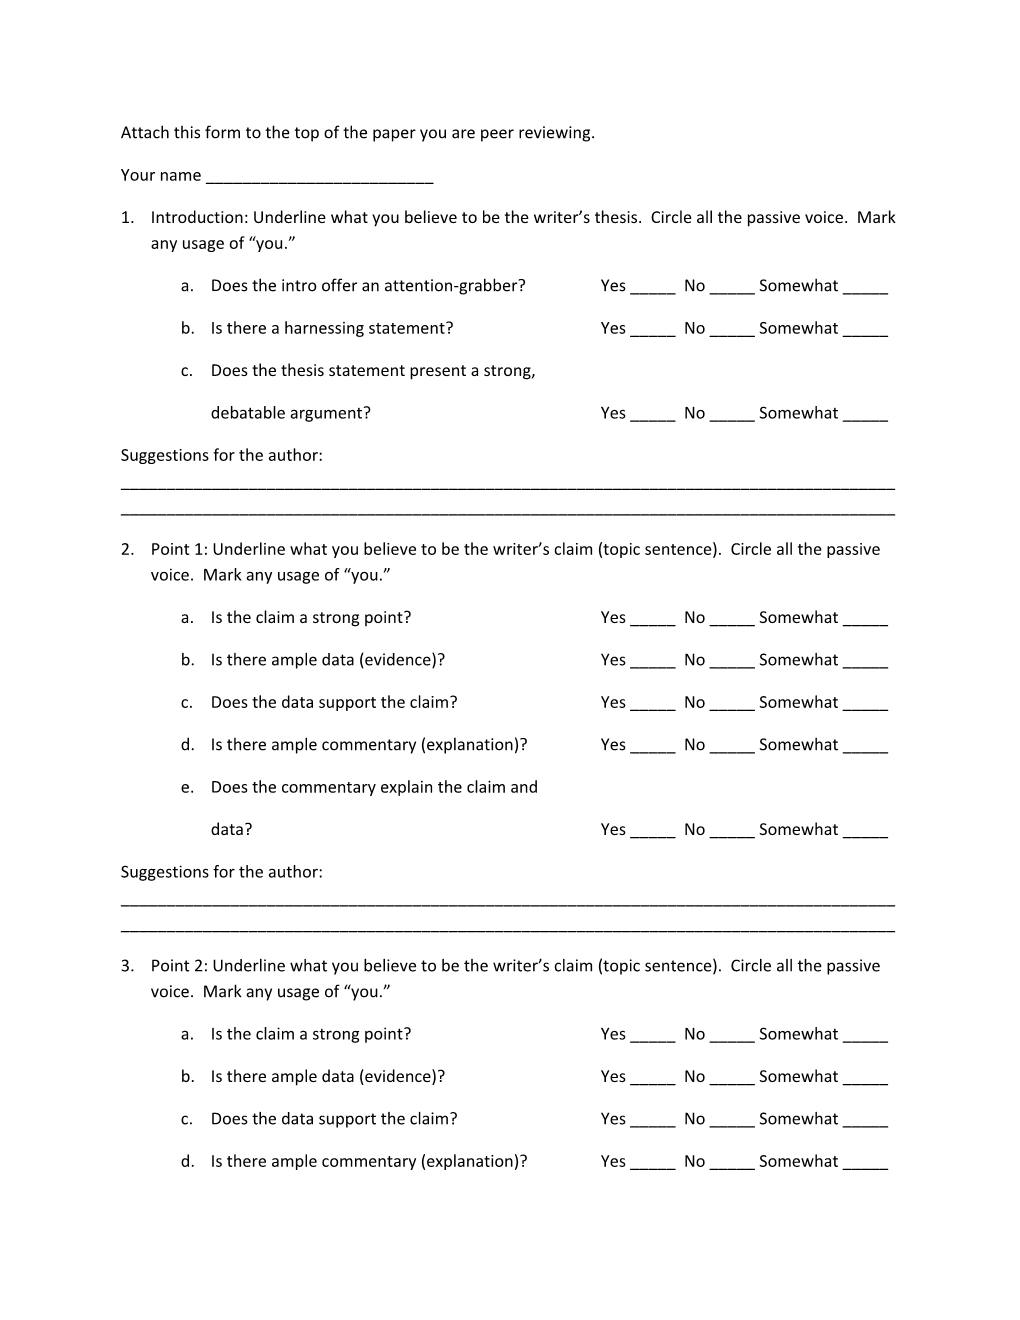 Attach This Form to the Top of the Paper You Are Peer Reviewing